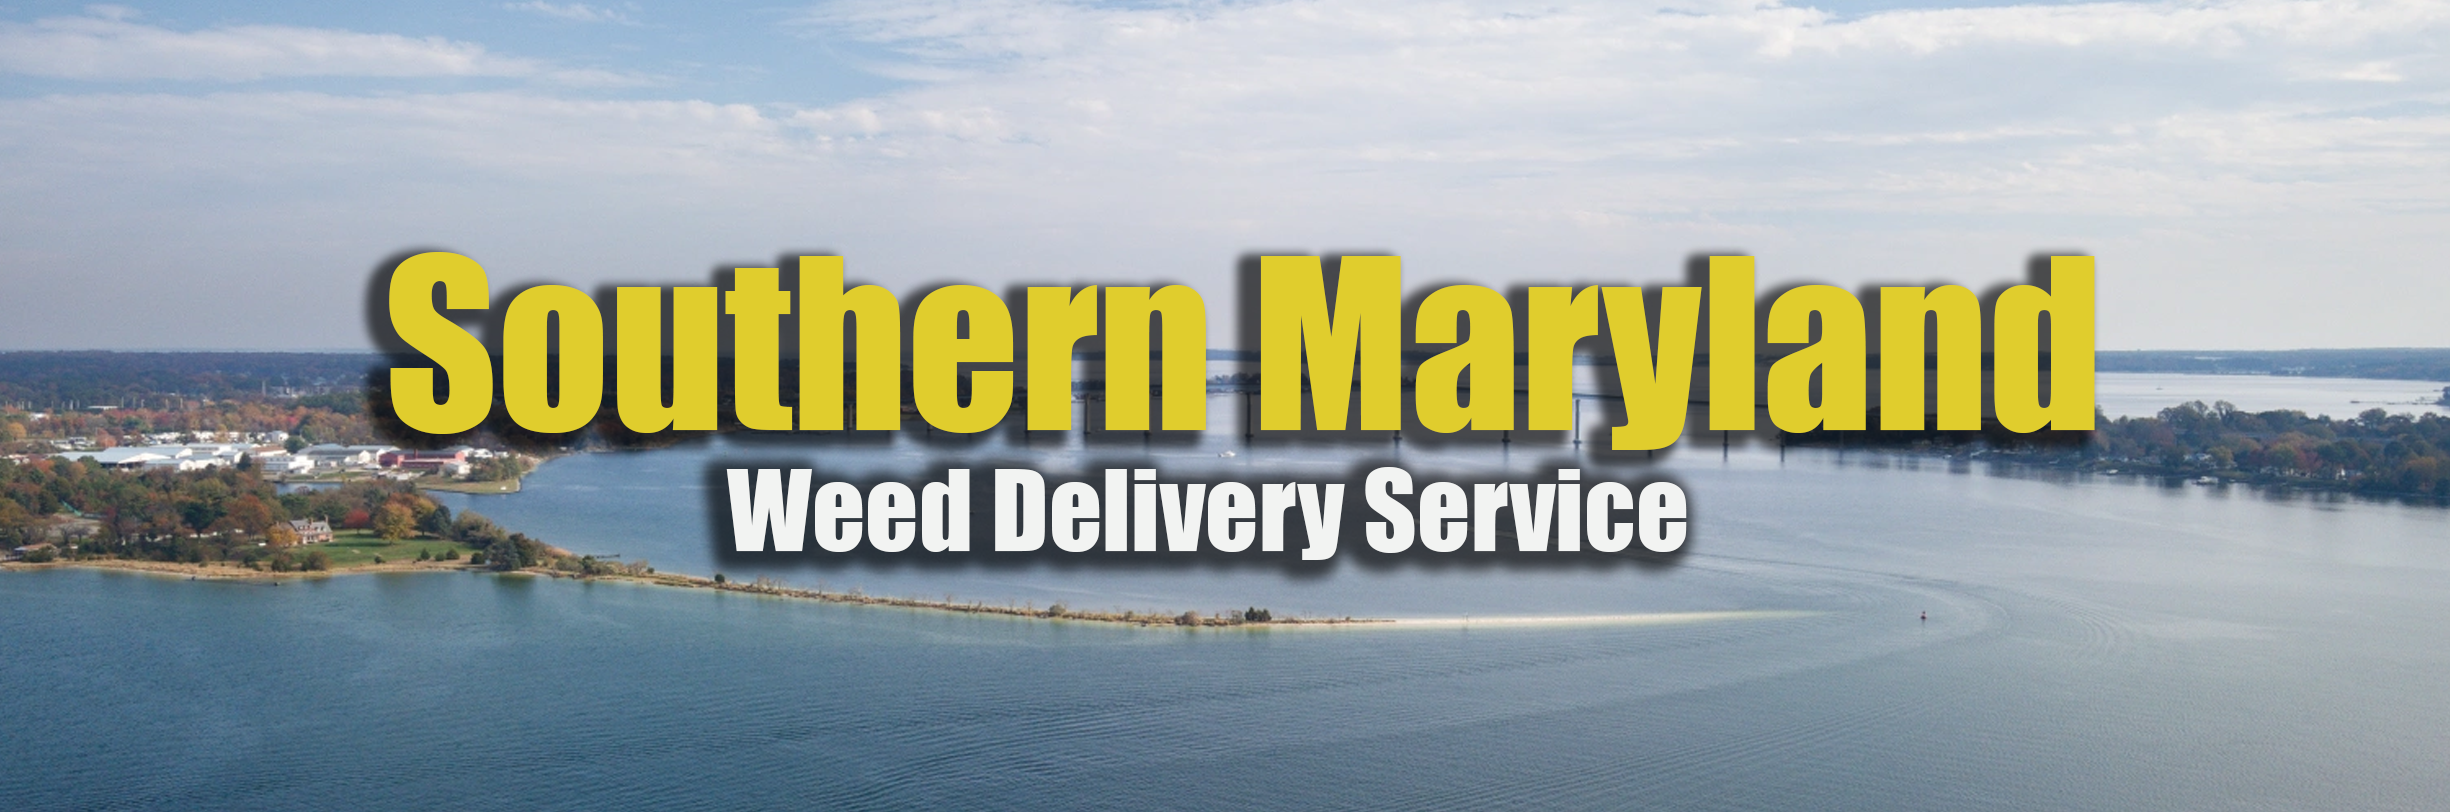 southern maryland weed delivery service